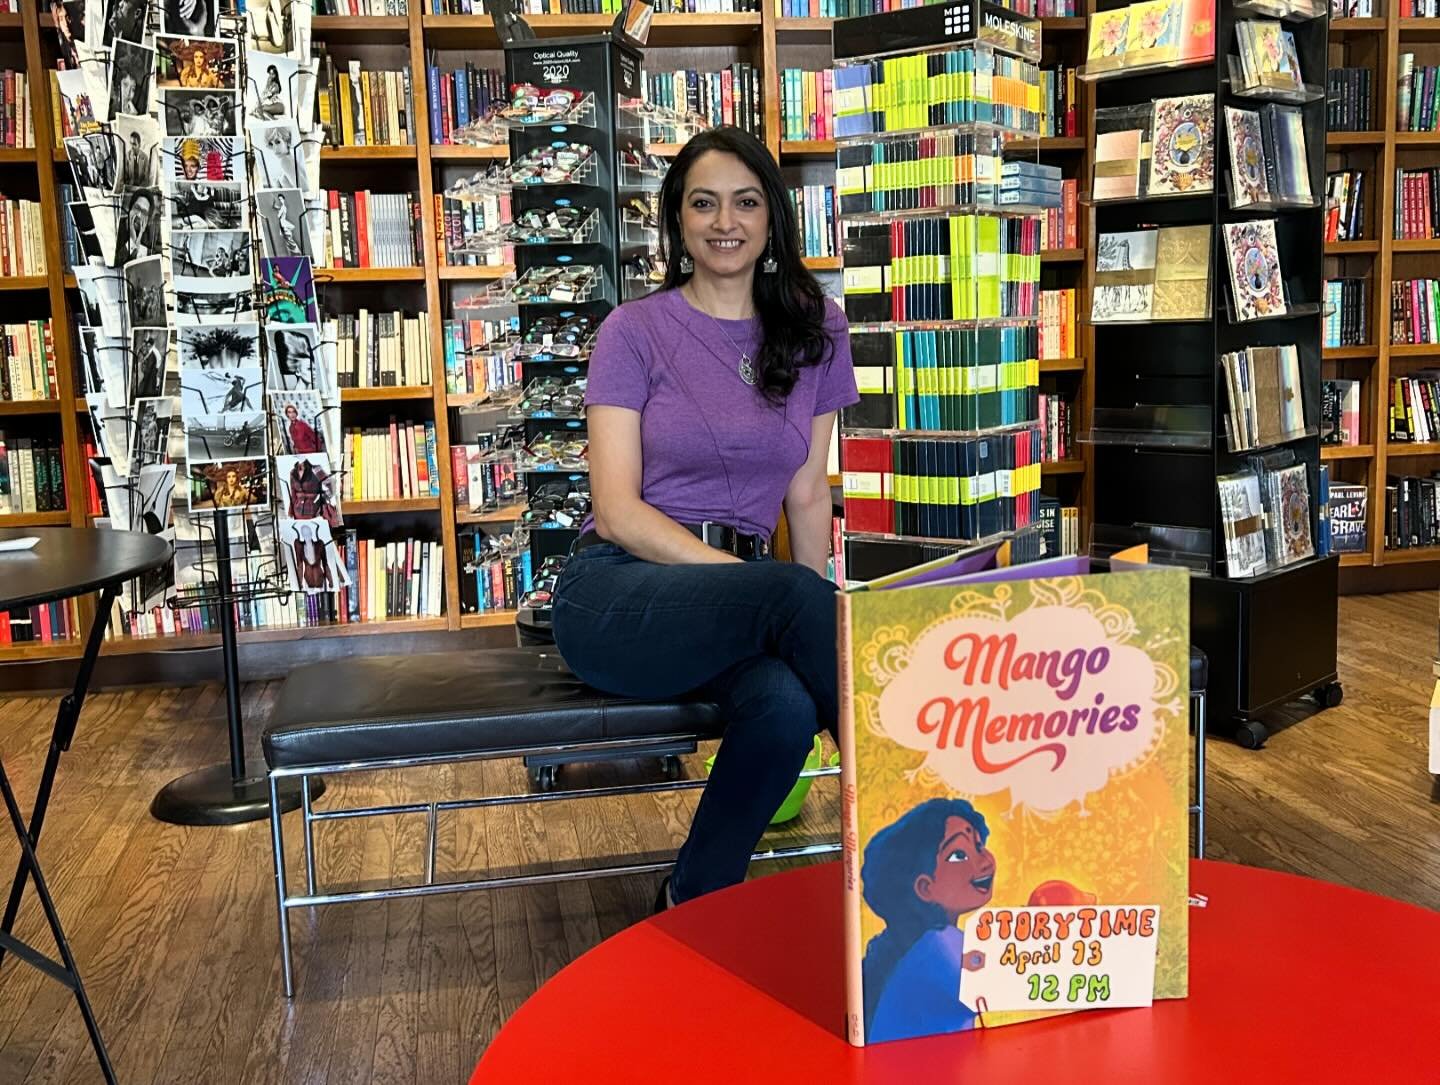 🥭Celebrating MANGO MEMORIES&hellip;Part 1🥭

What a wonderful afternoon we had at @booksandbooks yesterday! I was grateful to see so many familiar faces and so many new ones. And I had the most engaging audeience who made the storytime extra special